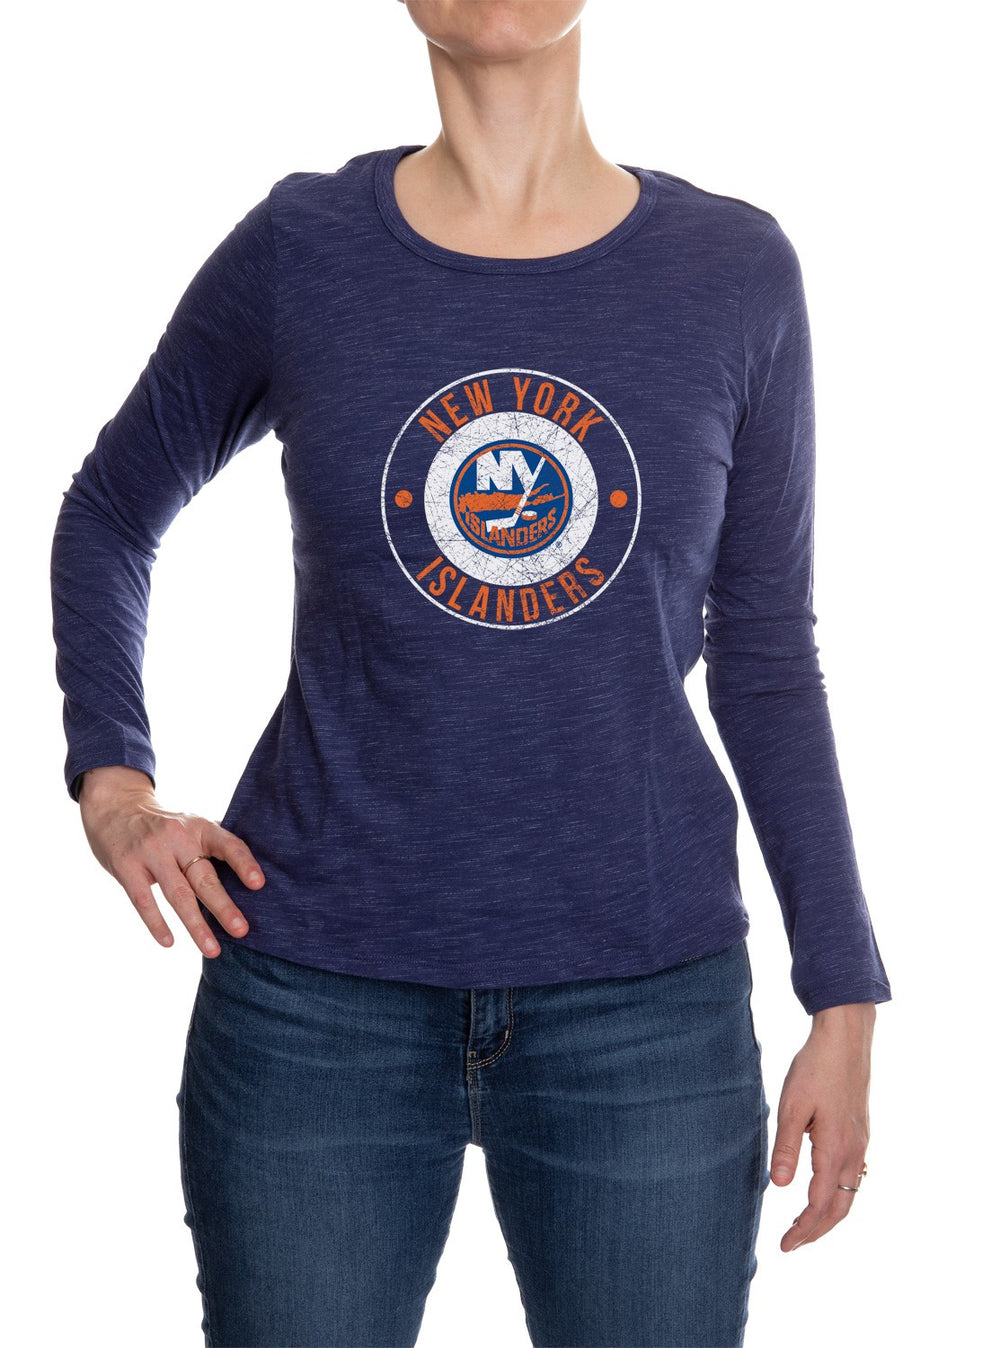 New York Islanders Distressed Logo Long Sleeve Shirt for Women in Blue Front View